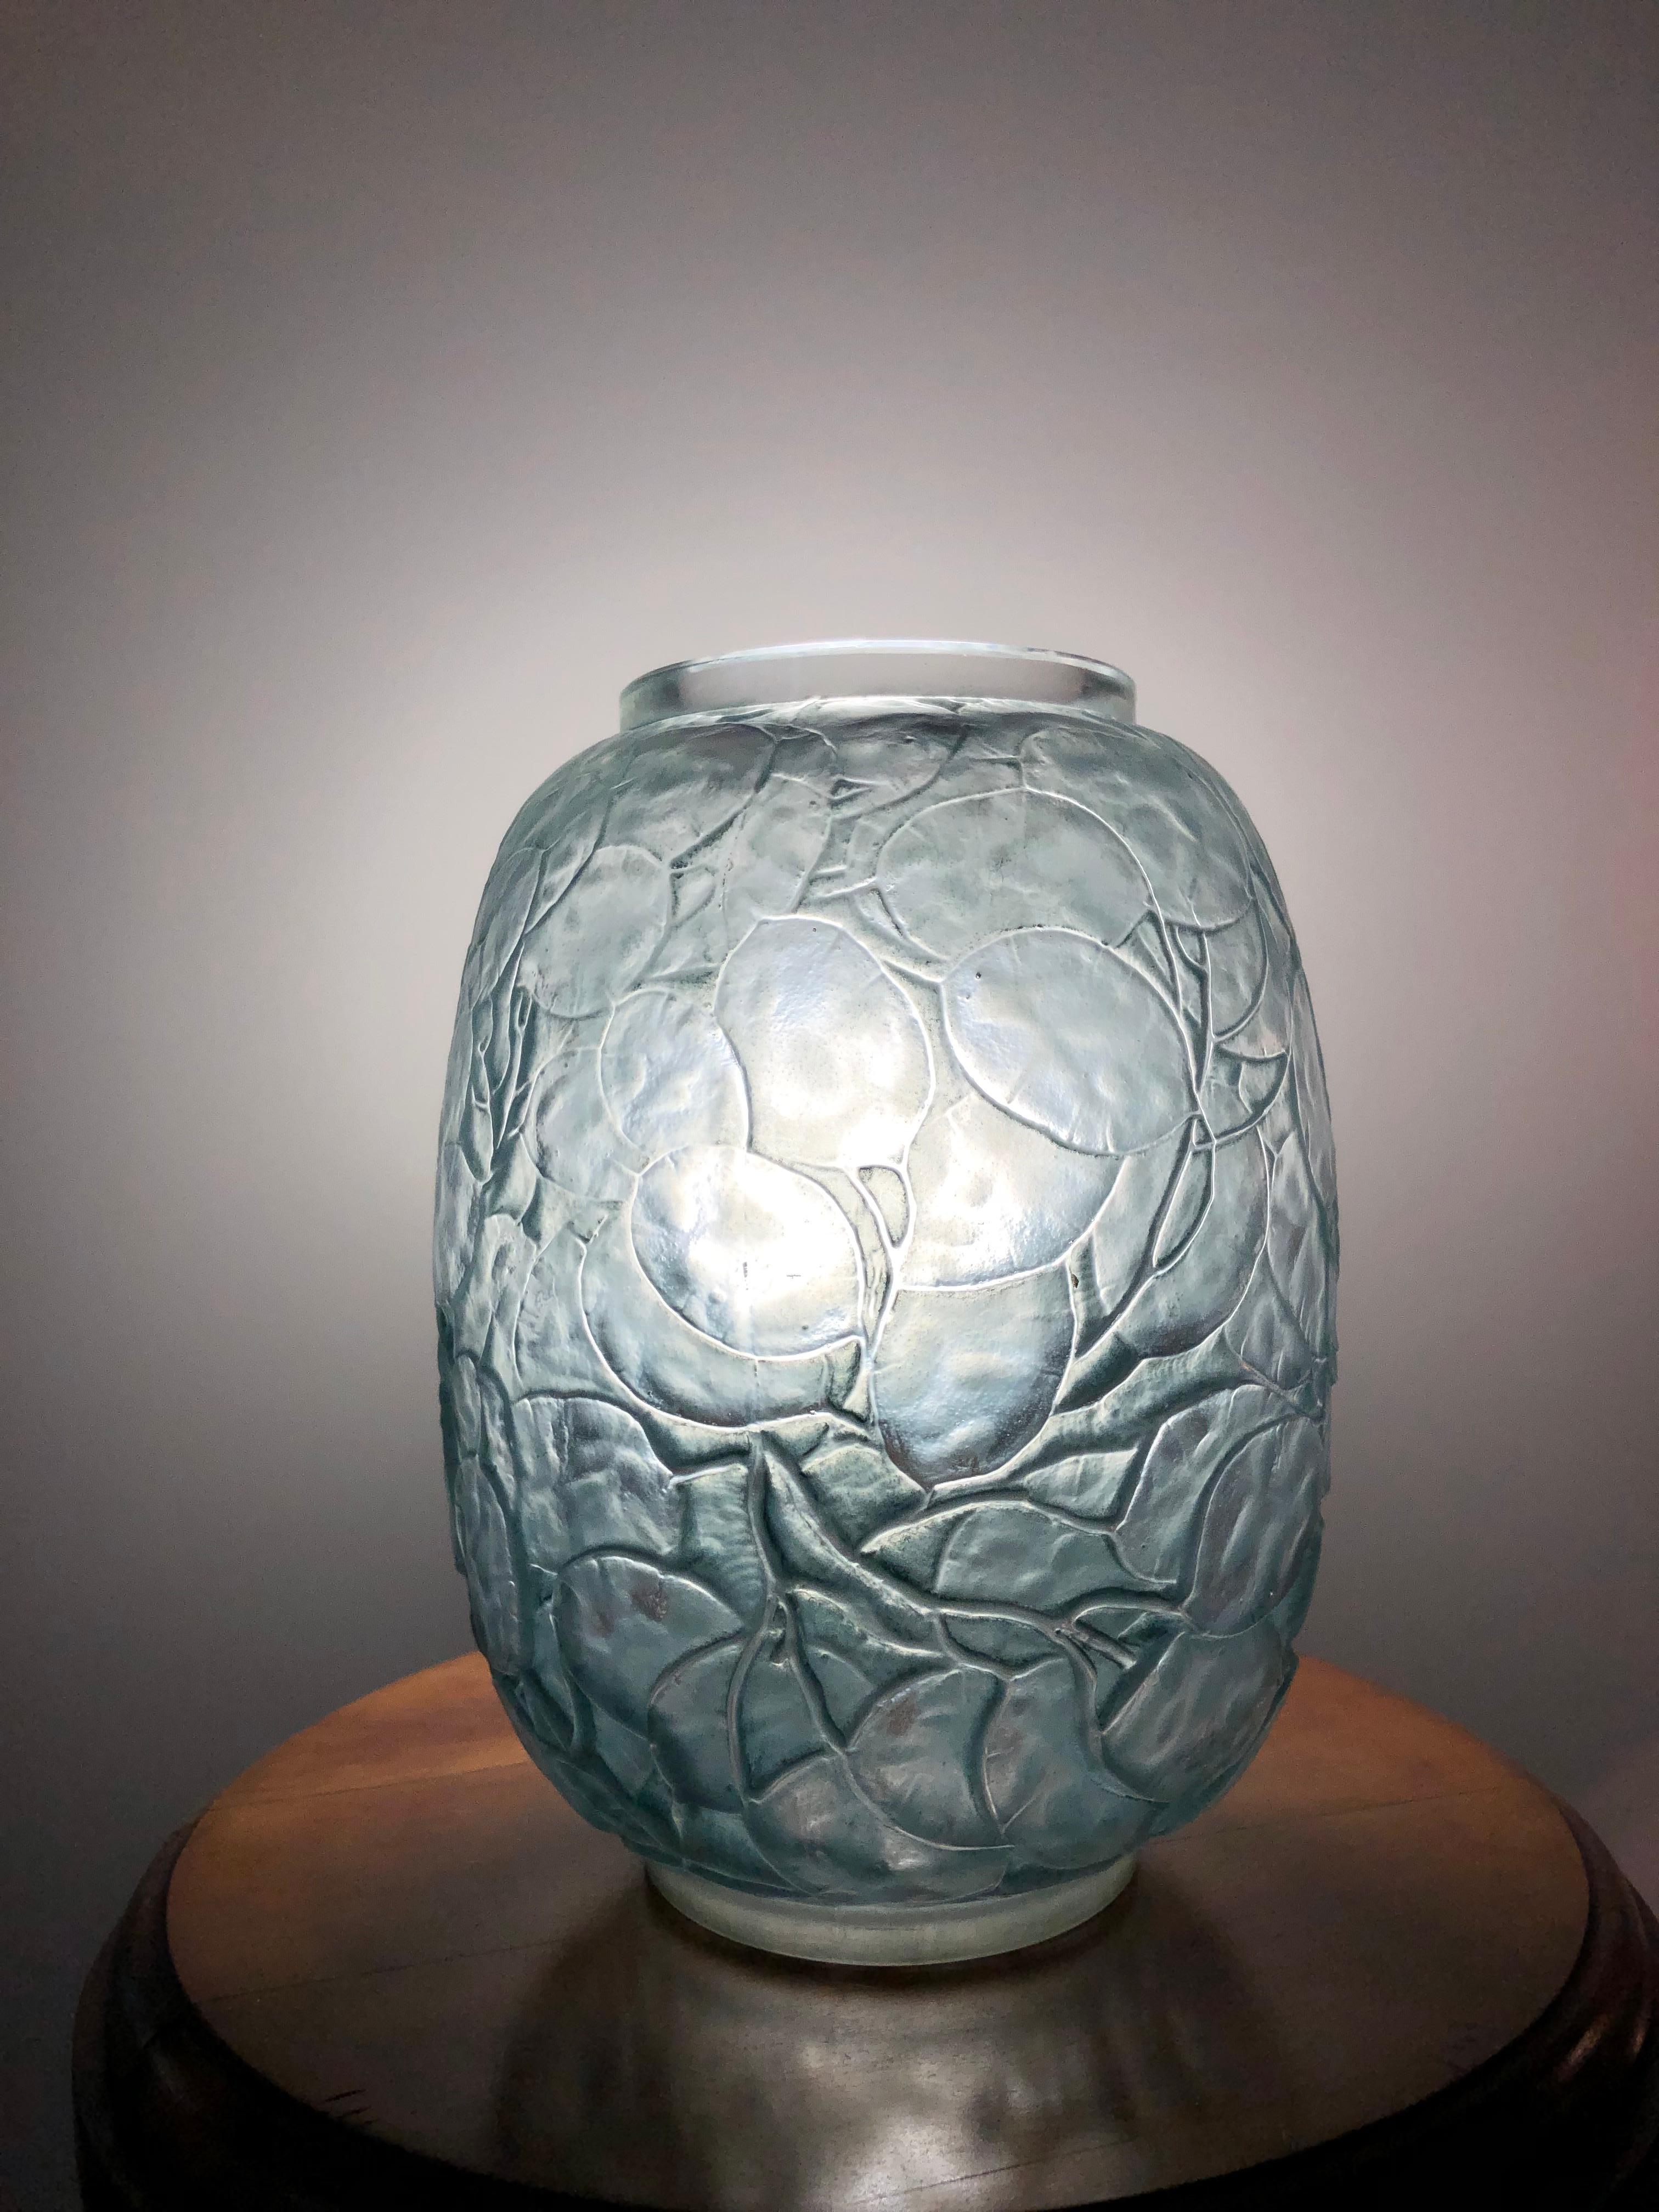 Molded 1914 René Lalique Monnaie du Pape Vase in Frosted Glass with Grey-Blue Stain